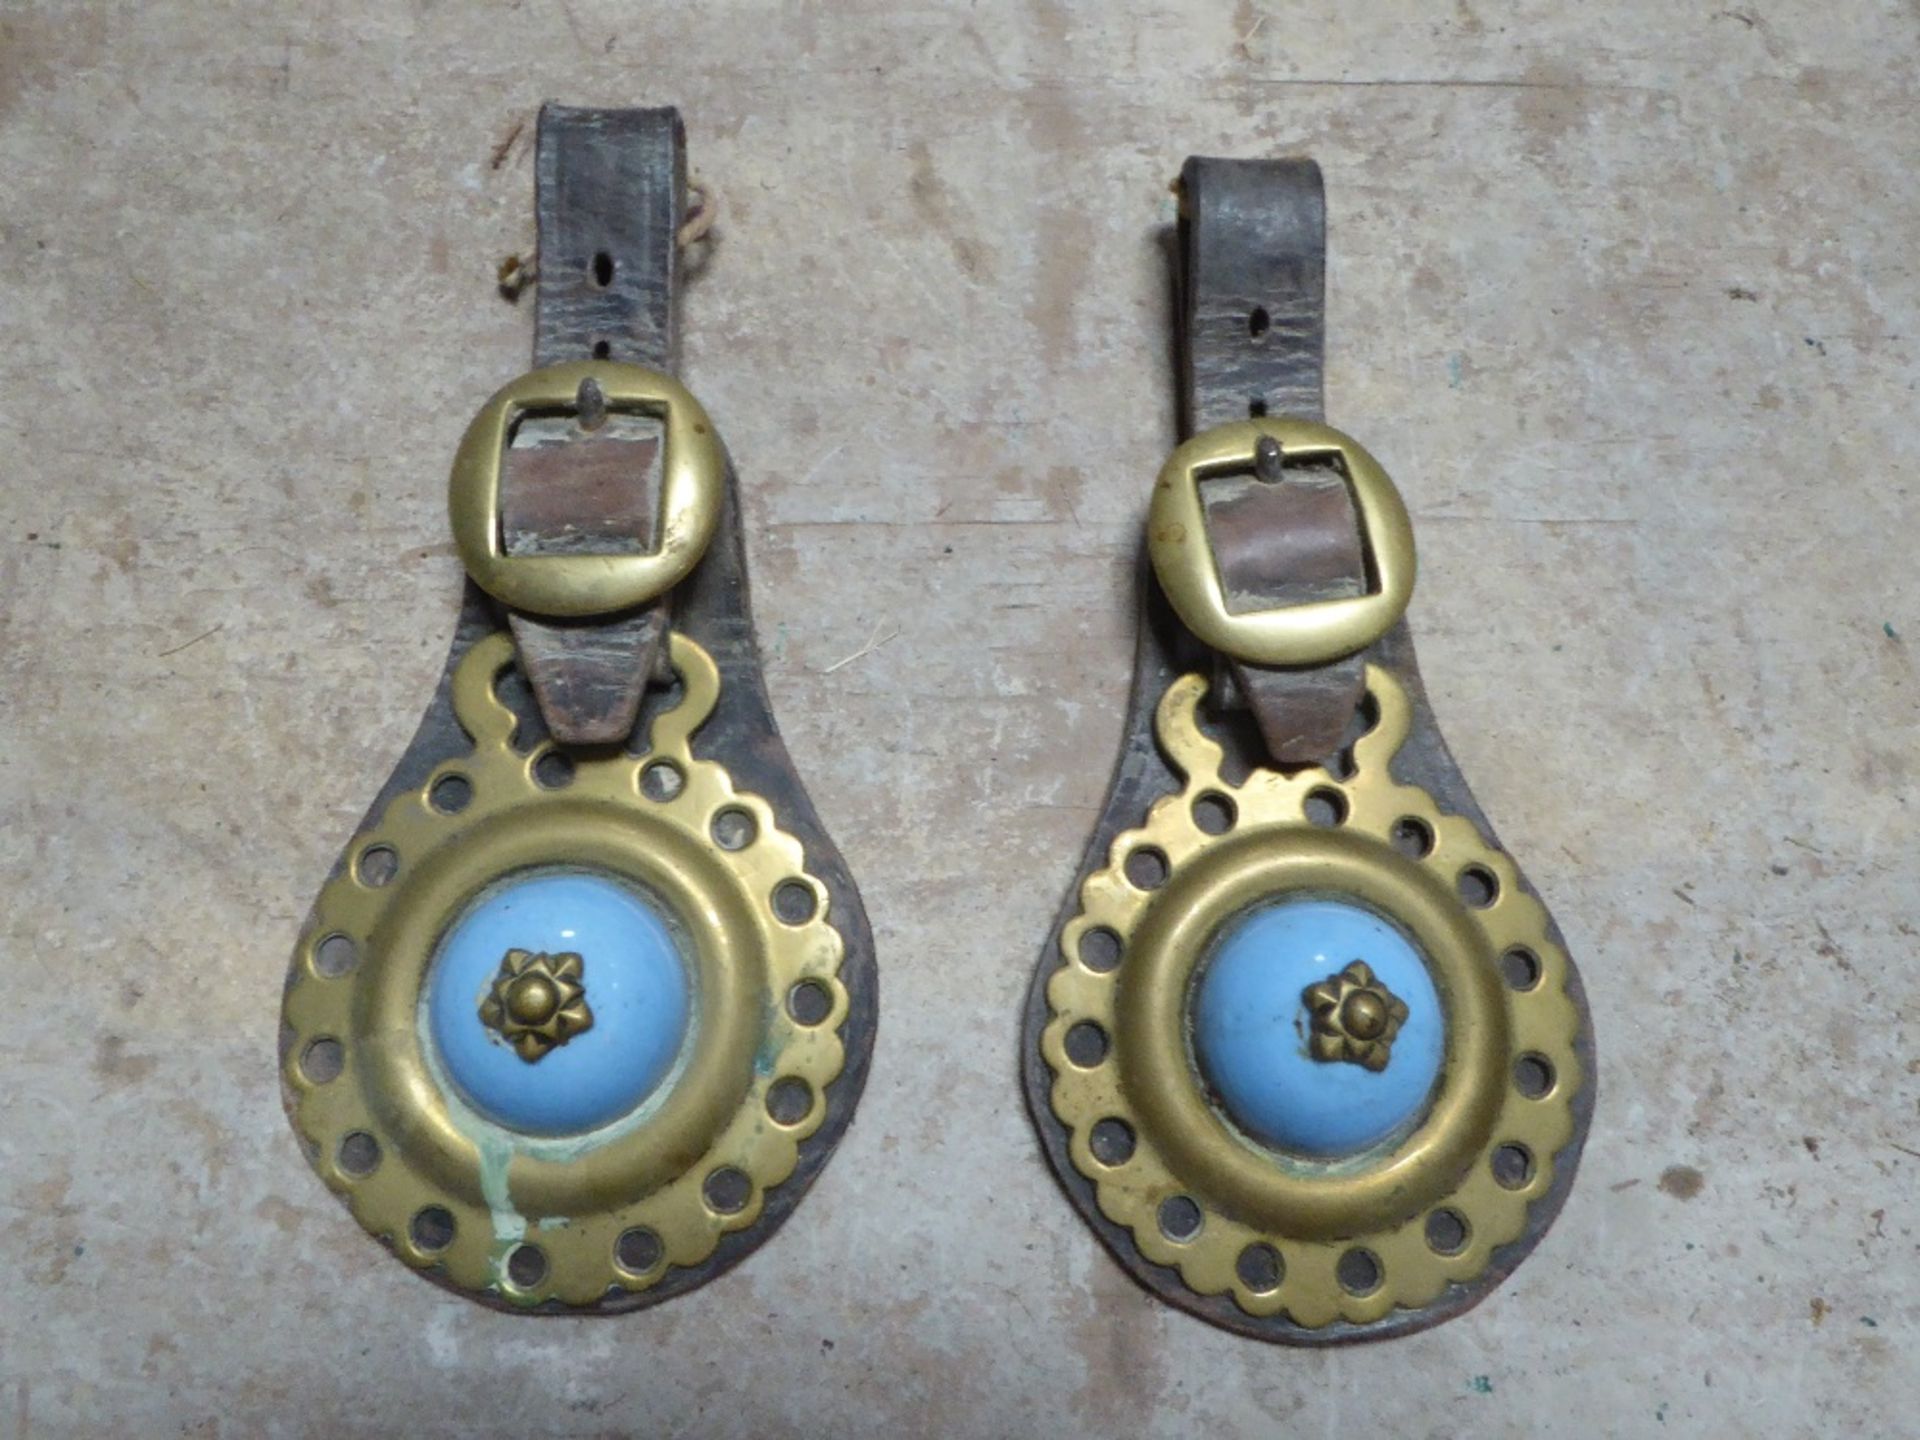 Pair of leather headpieces each with a light blue ceramic centred horse brass